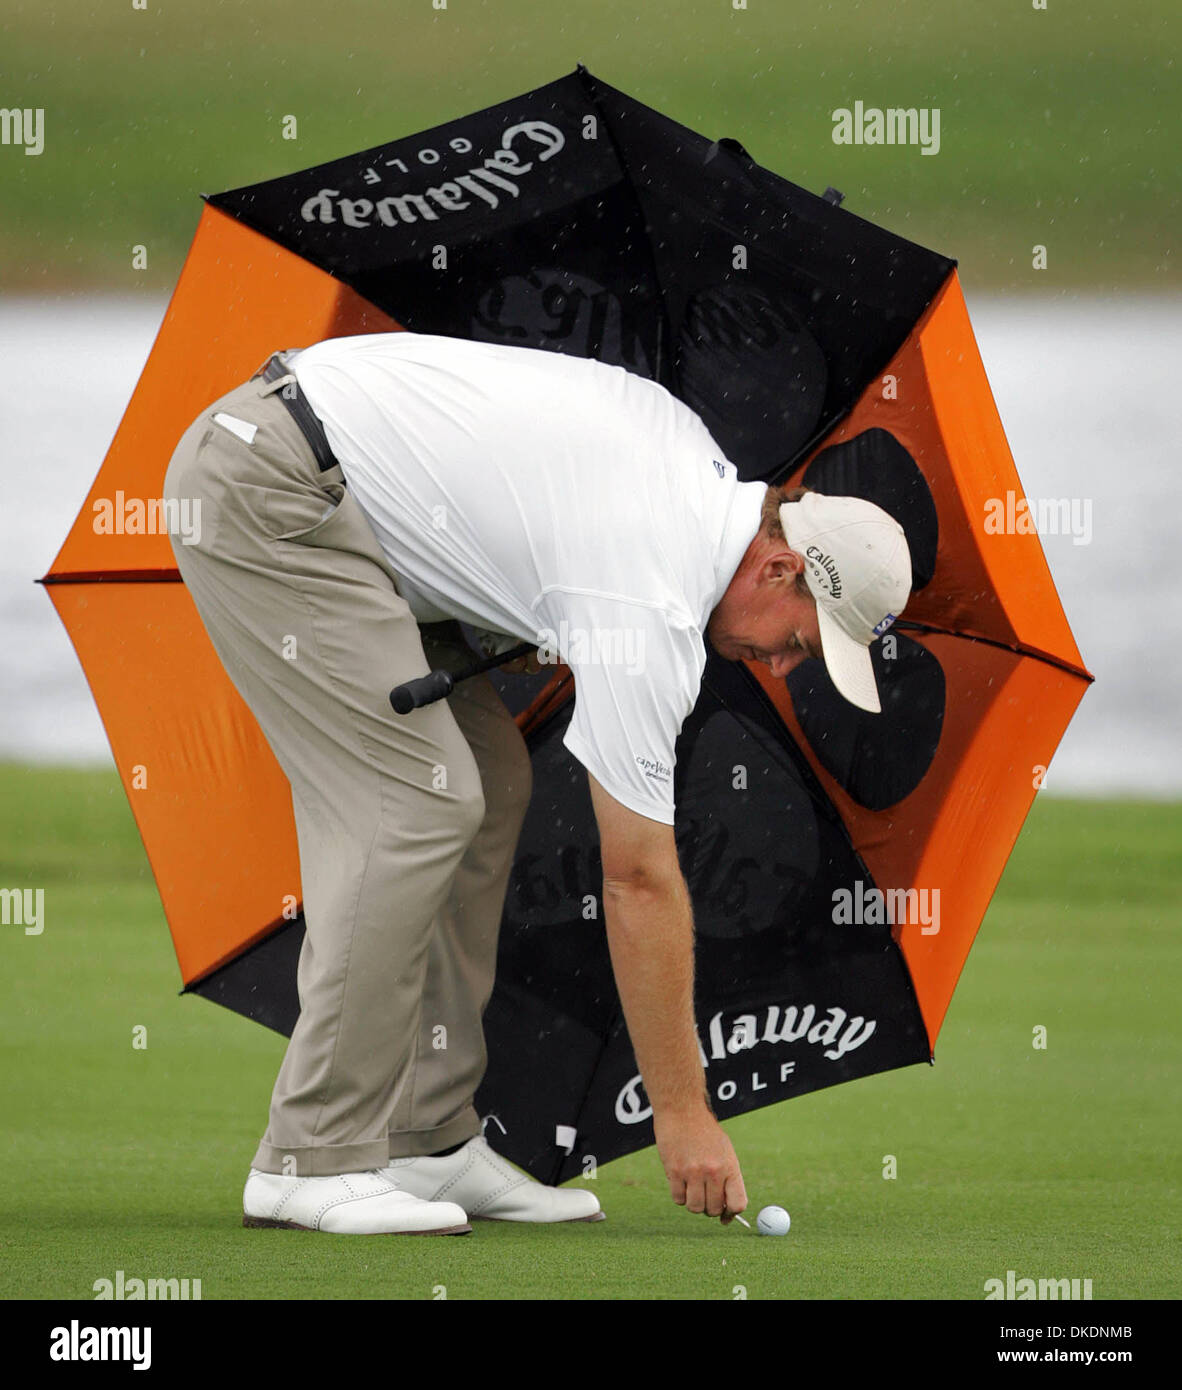 Mar 22, 2007 - Doral, FL, USA - ERNIE ELS marks his ball on the 18th fairway during a rain shower. Els finished at 2 under par. (Credit Image: © Allen Eyestone/Palm Beach Post/ZUMA Press) RESTRICTIONS: USA Tabloid RIGHTS OUT! Stock Photo